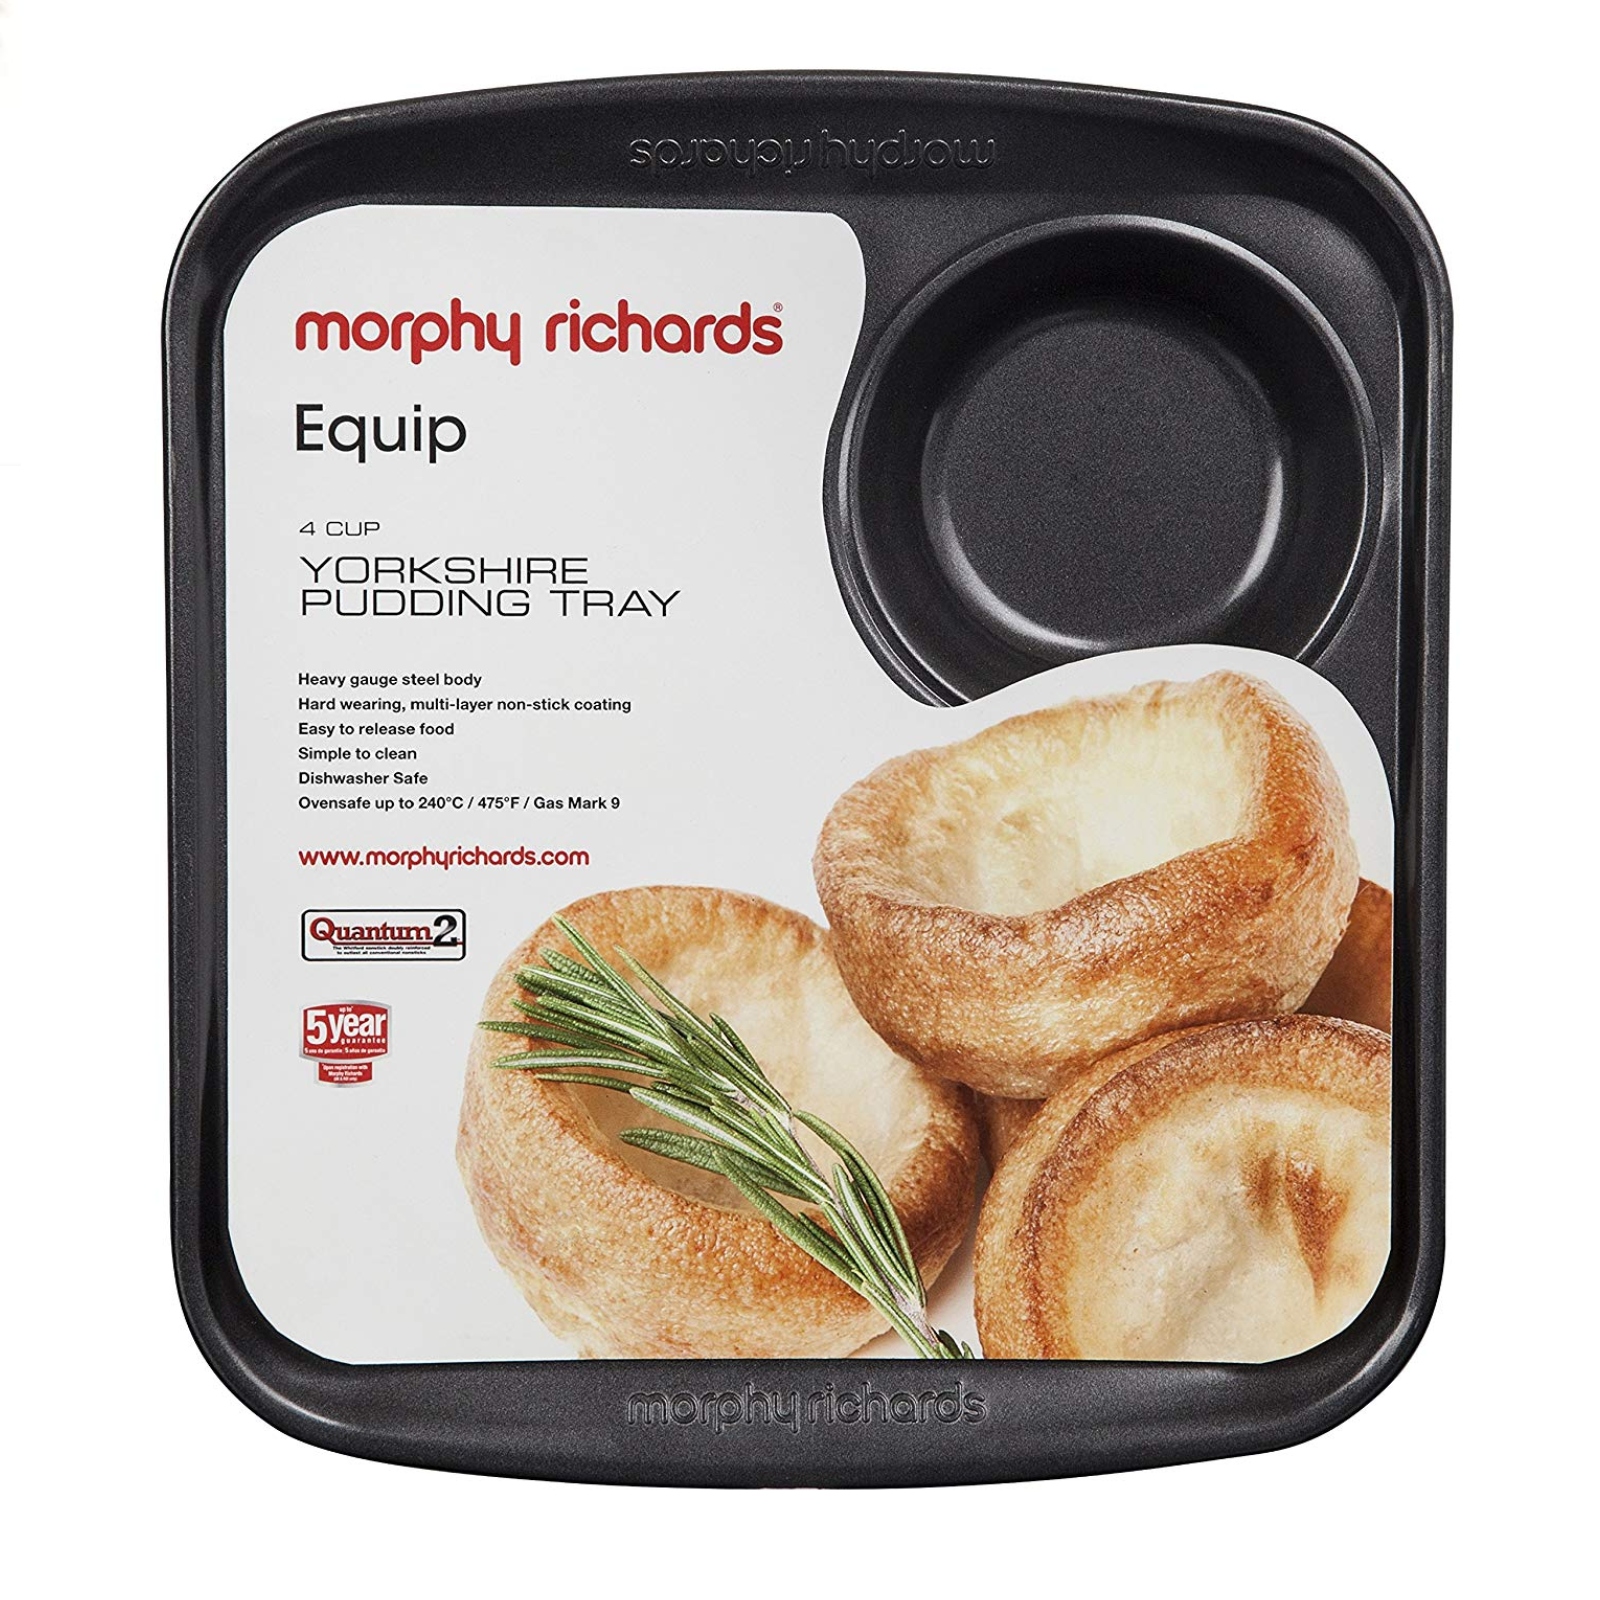 Morphy Richards 4 Cup Yorkshire Pudding Tray